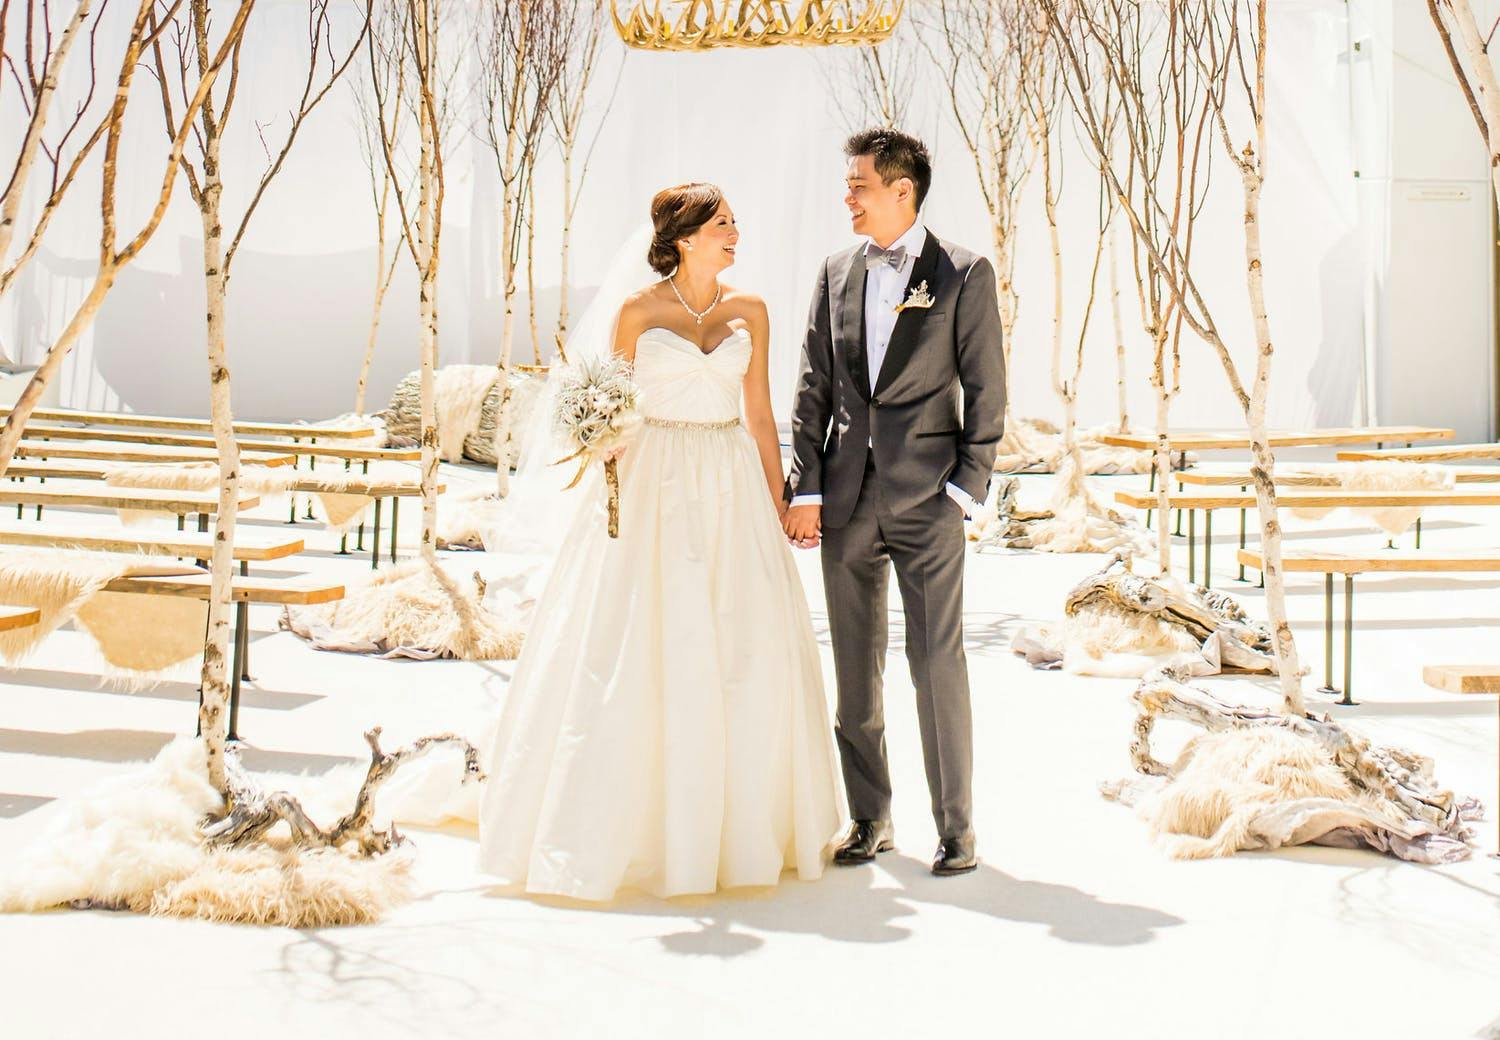 Couple poses in aisle at winter wedding without flowers and soft whites, grays and a natural wood palette as well as bare branch trees | PartySlate